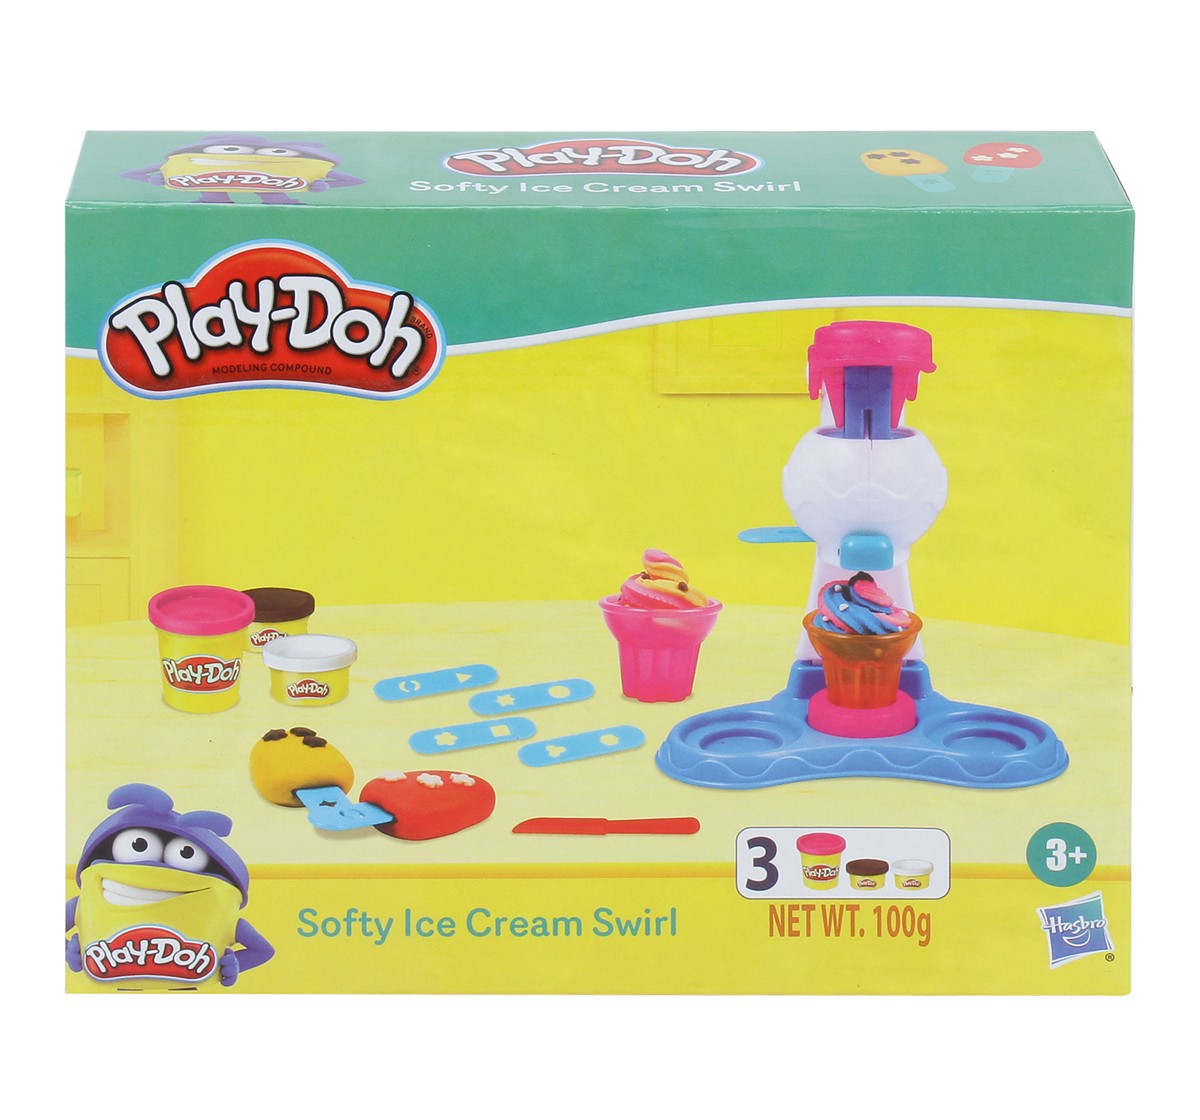 Play Doh Softy Ice Cream Swirl Playset for Kids 3Y+, Multicolour